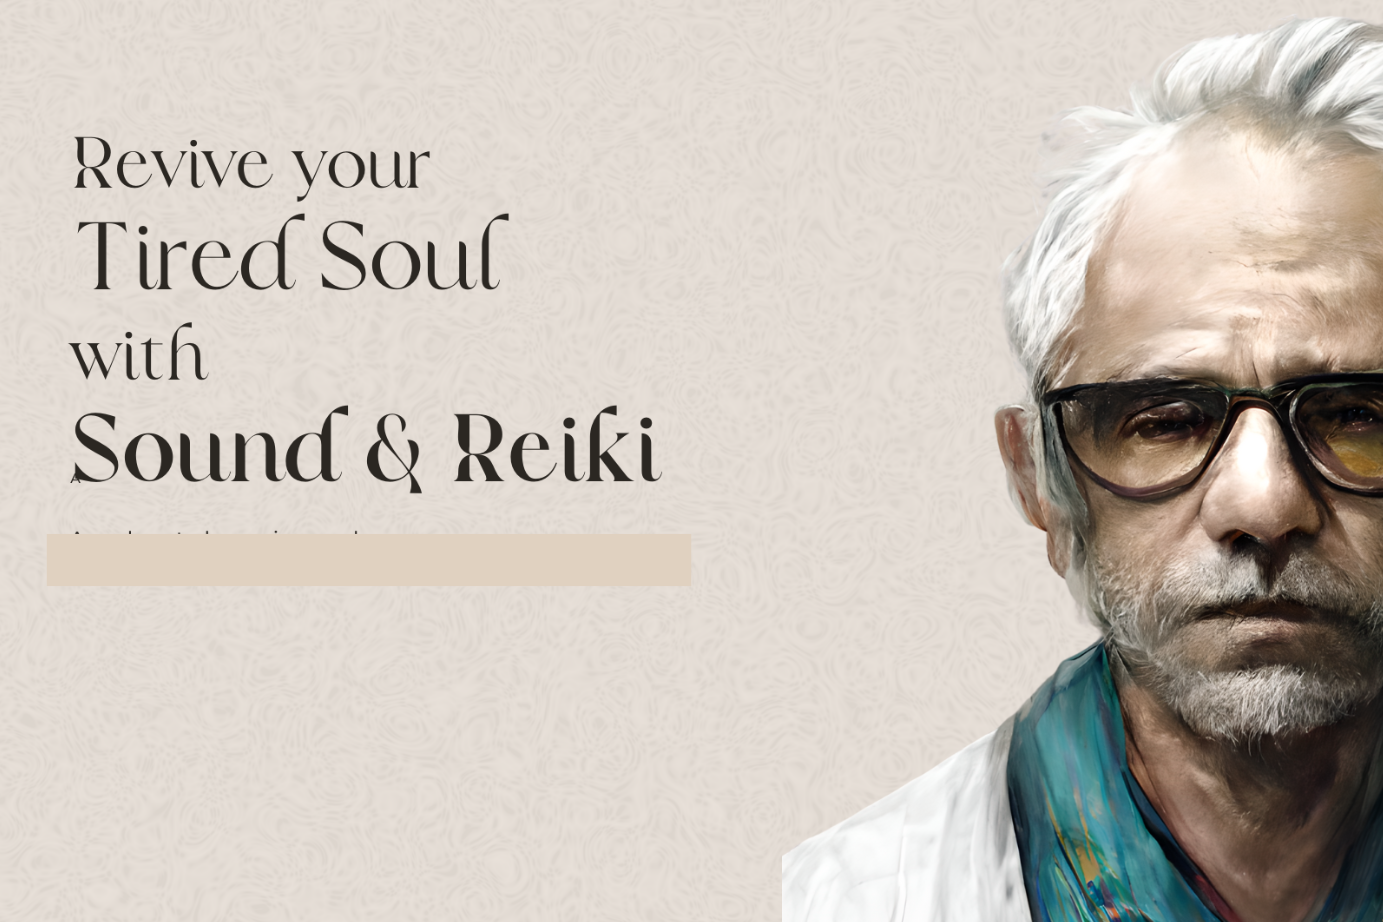 Revive your Tired Soul with Sound & Reiki